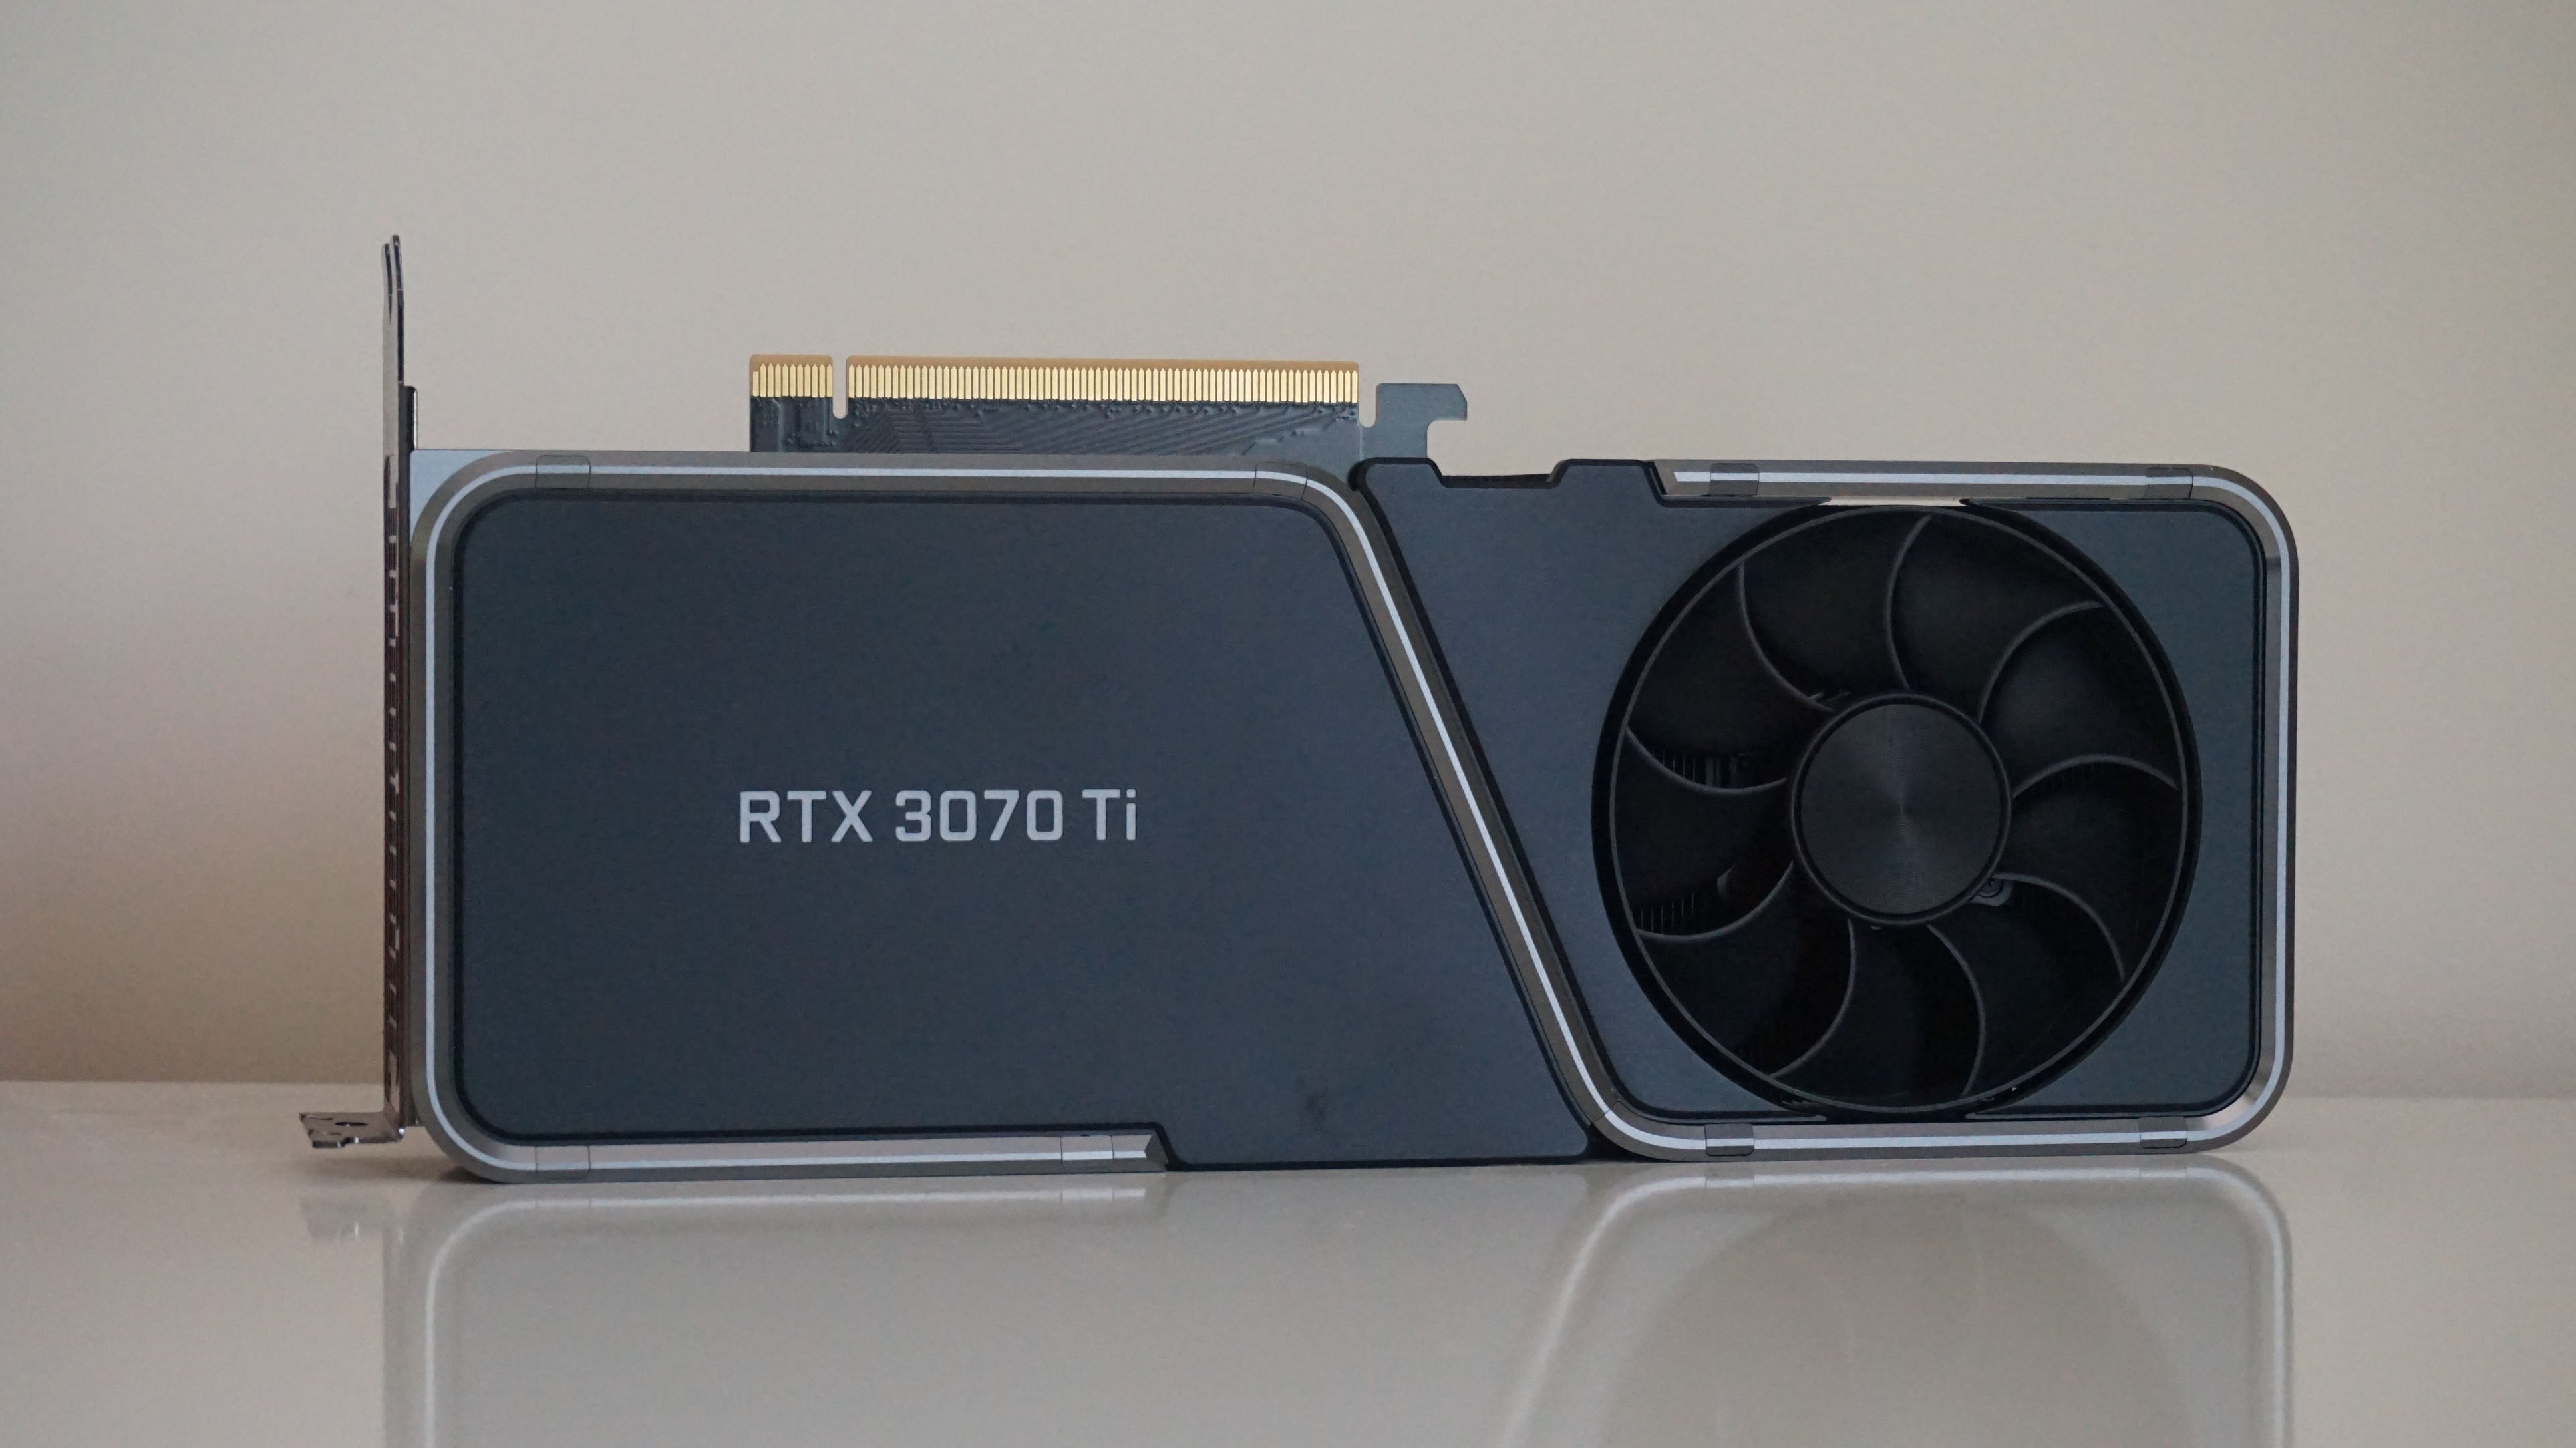 A photo of Nvidia's GeForce RTX 3070 Ti Founders Edition graphics card